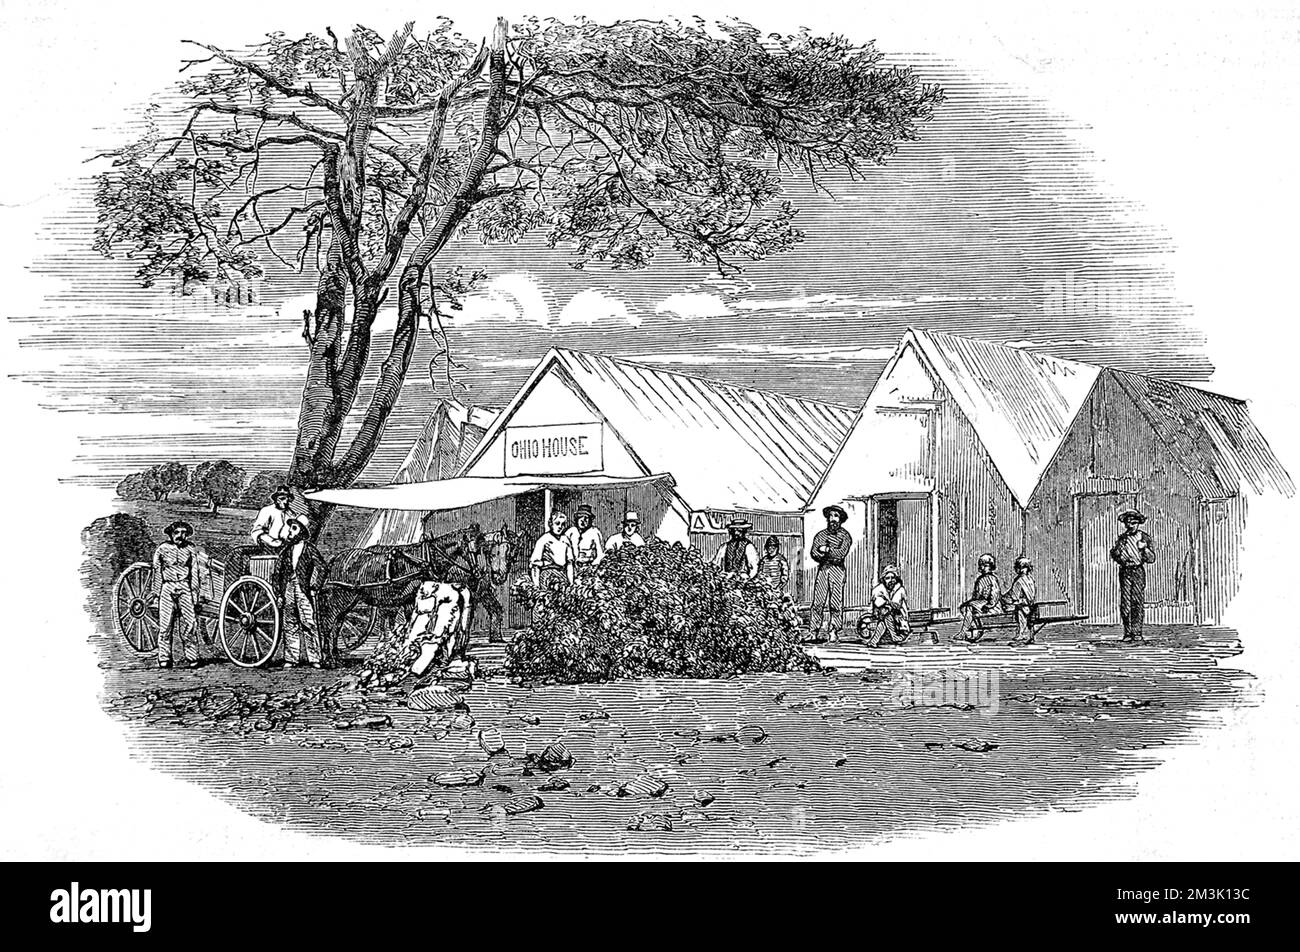 The town of Sicard was set up on the banks of the Yuba by an old provencal sailor called Sicard, one of the first successful gold miners in the region. It contained 200 houses at this time and hotels , cafes and a playhouse.     Date: 1853 Stock Photo